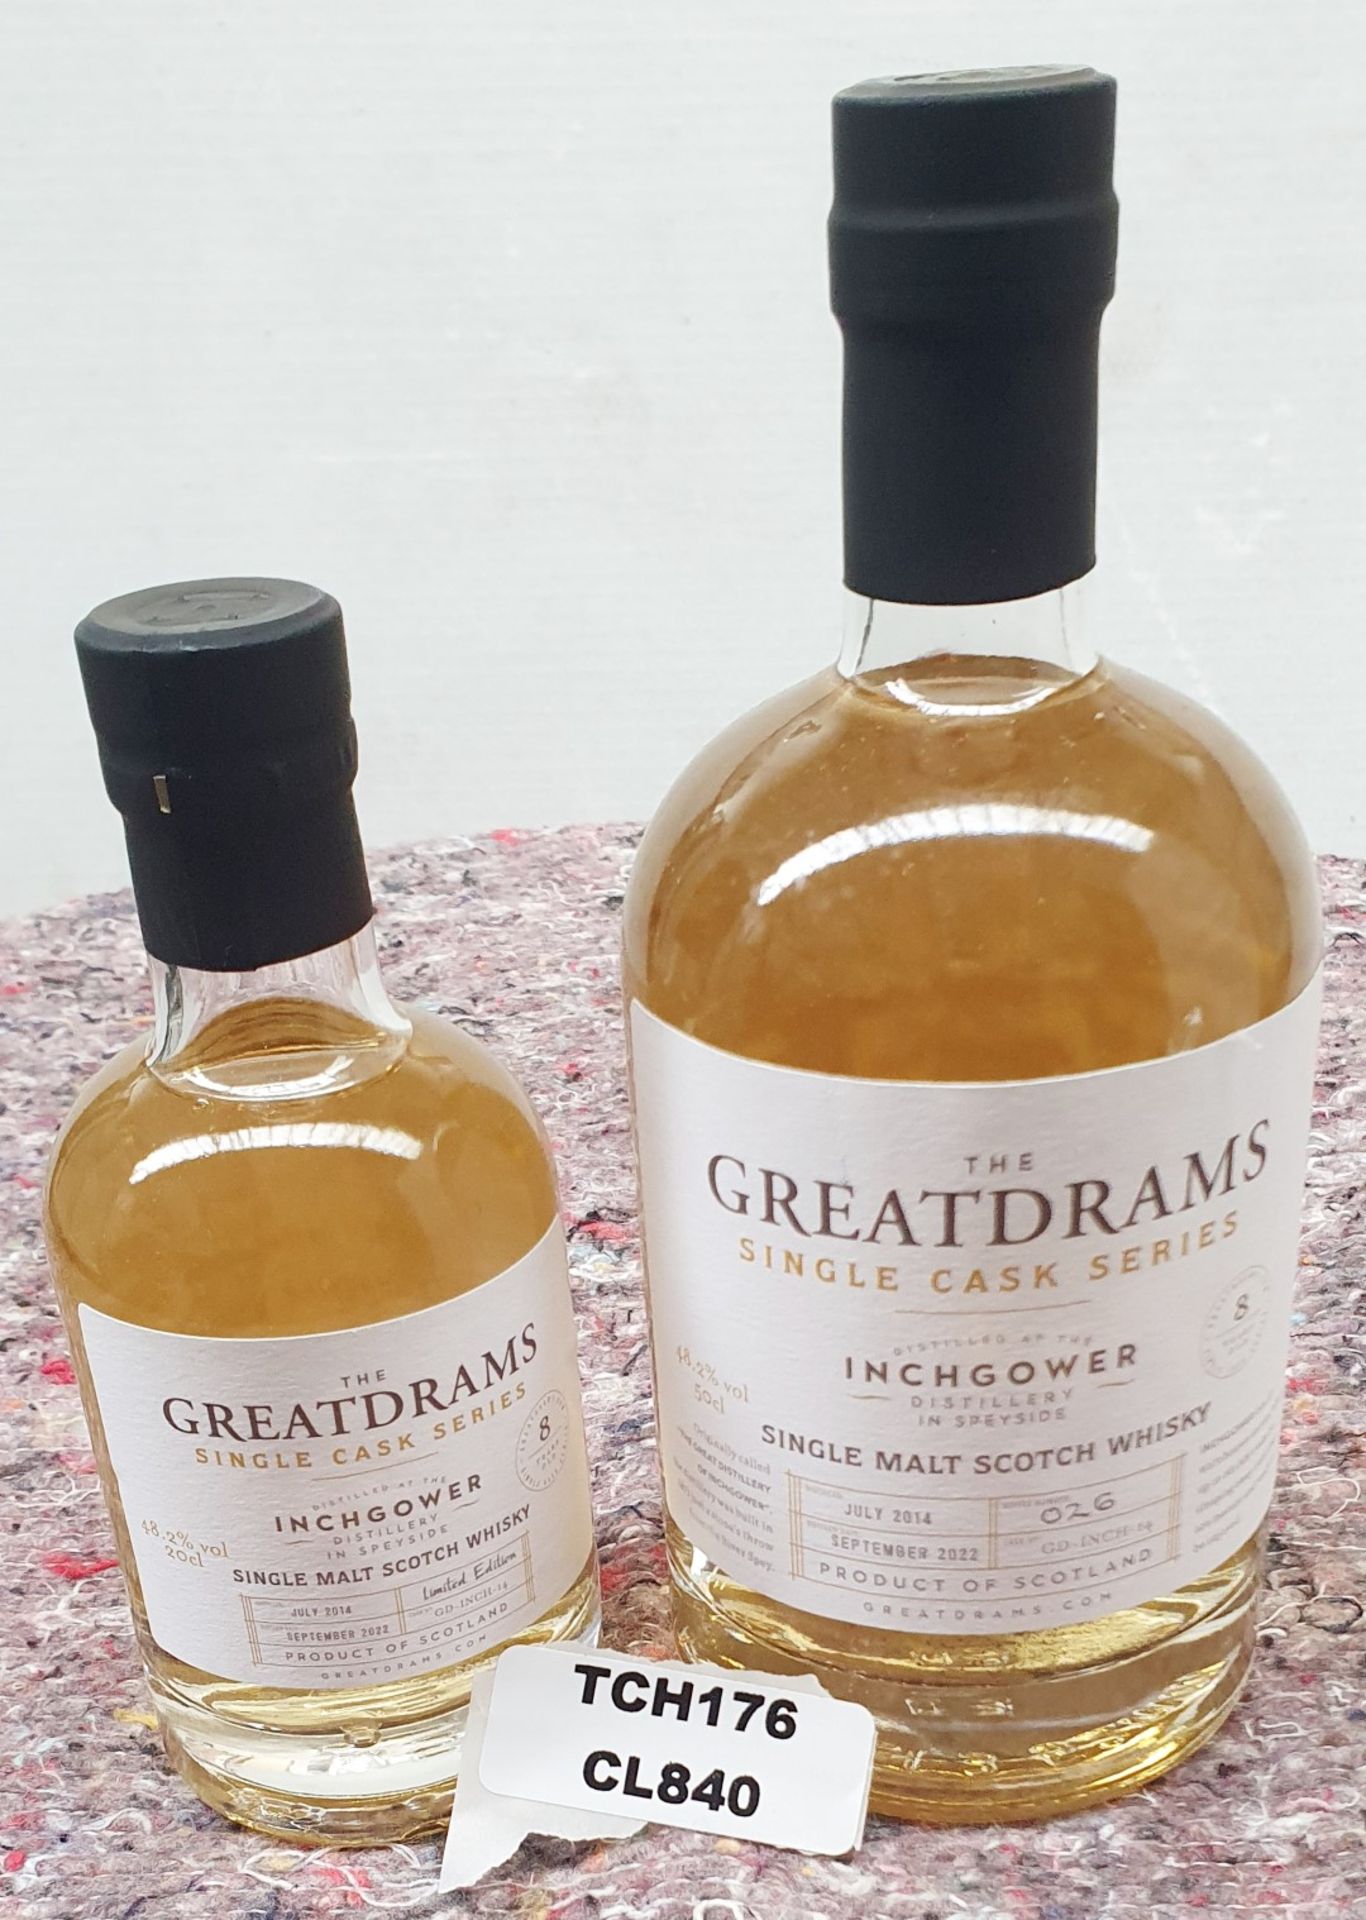 2 x Bottles of Greatdrams Single Cask Series Inchgower Single Malt Scotch Whisky - Includes 20cl and - Image 4 of 4